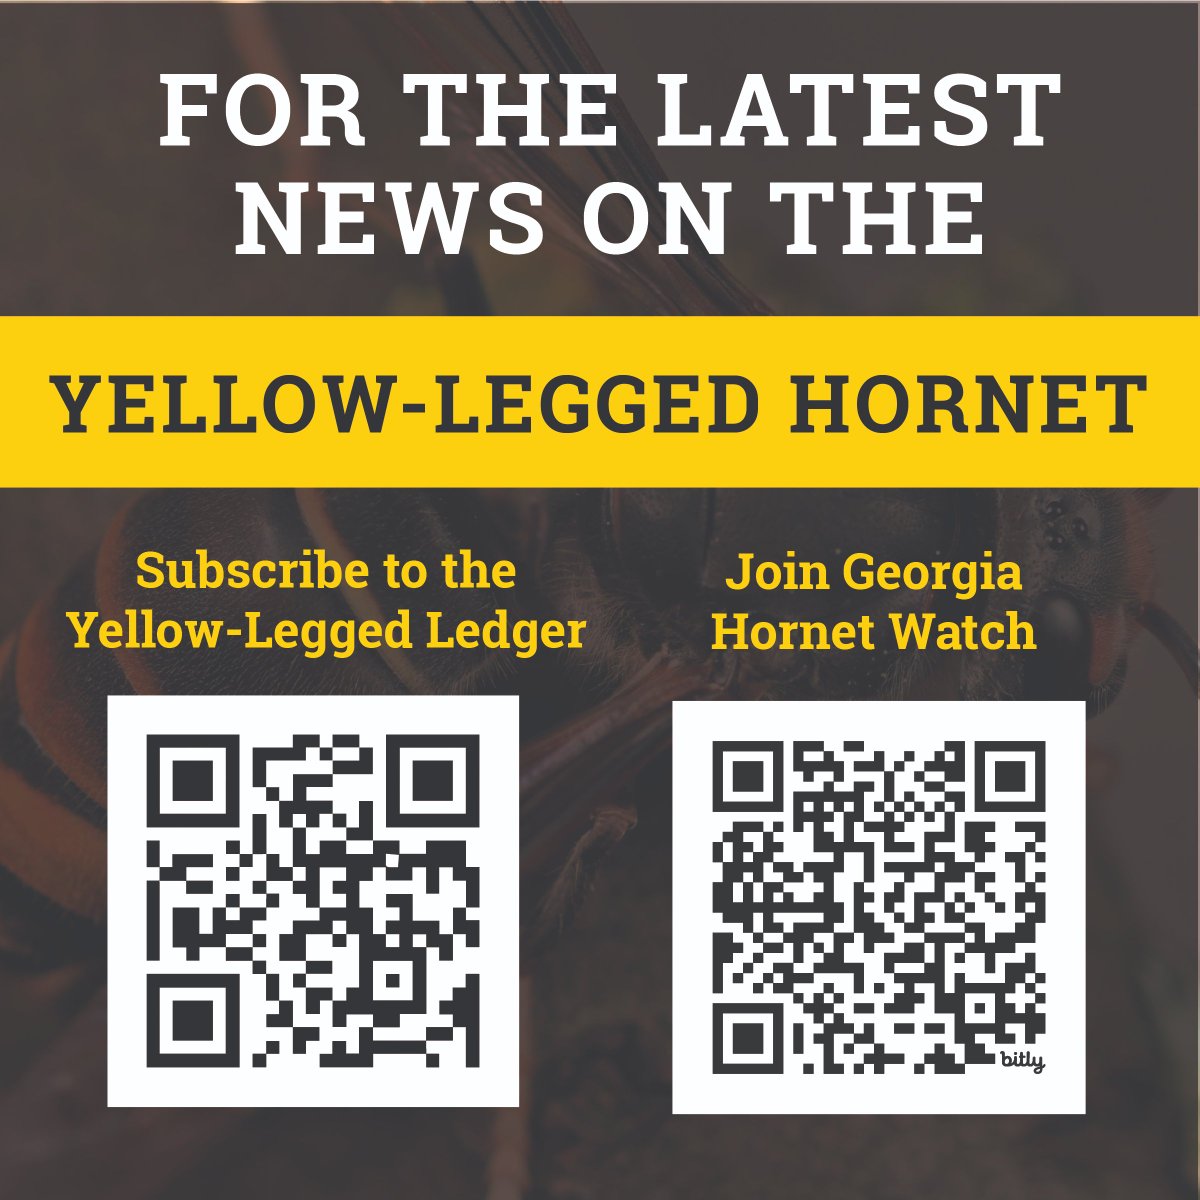 Stay updated on developments regarding Yellow-Legged Hornets by joining our dedicated Facebook group, Georgia Hornet Watch, & subscribing to our newsletter, Yellow-Legged Ledger. 🔗 Georgia Hornet Watch: facebook.com/groups/georgia… 🔗 Yellow-Legged Ledger: gdaforms.wufoo.com/forms/yellowle…